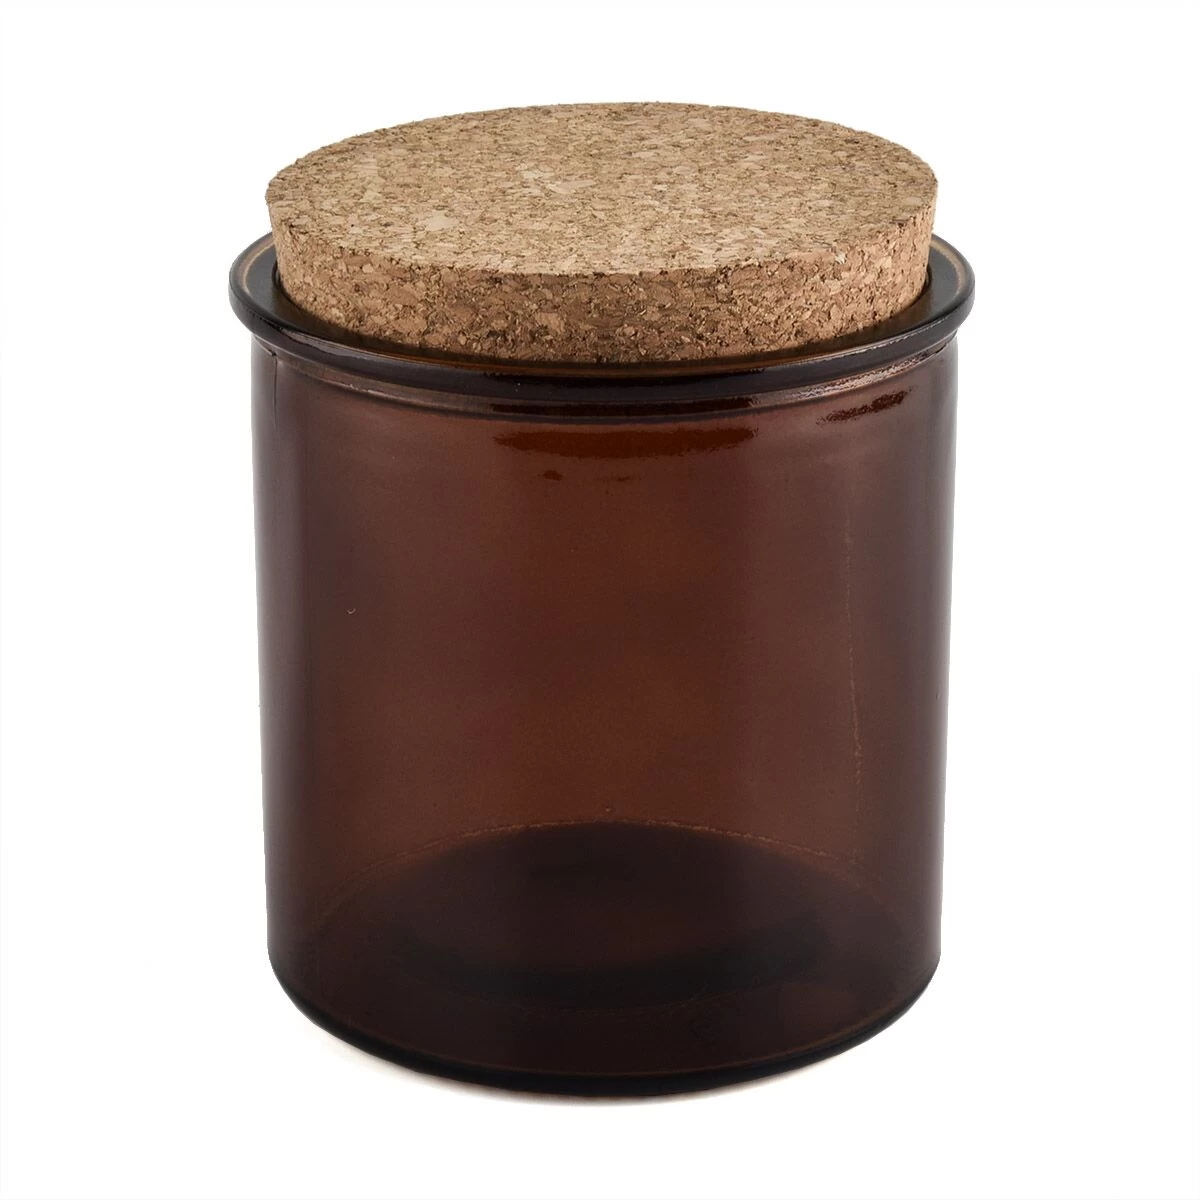 5oz glass candle jar with cork lid for wholesale